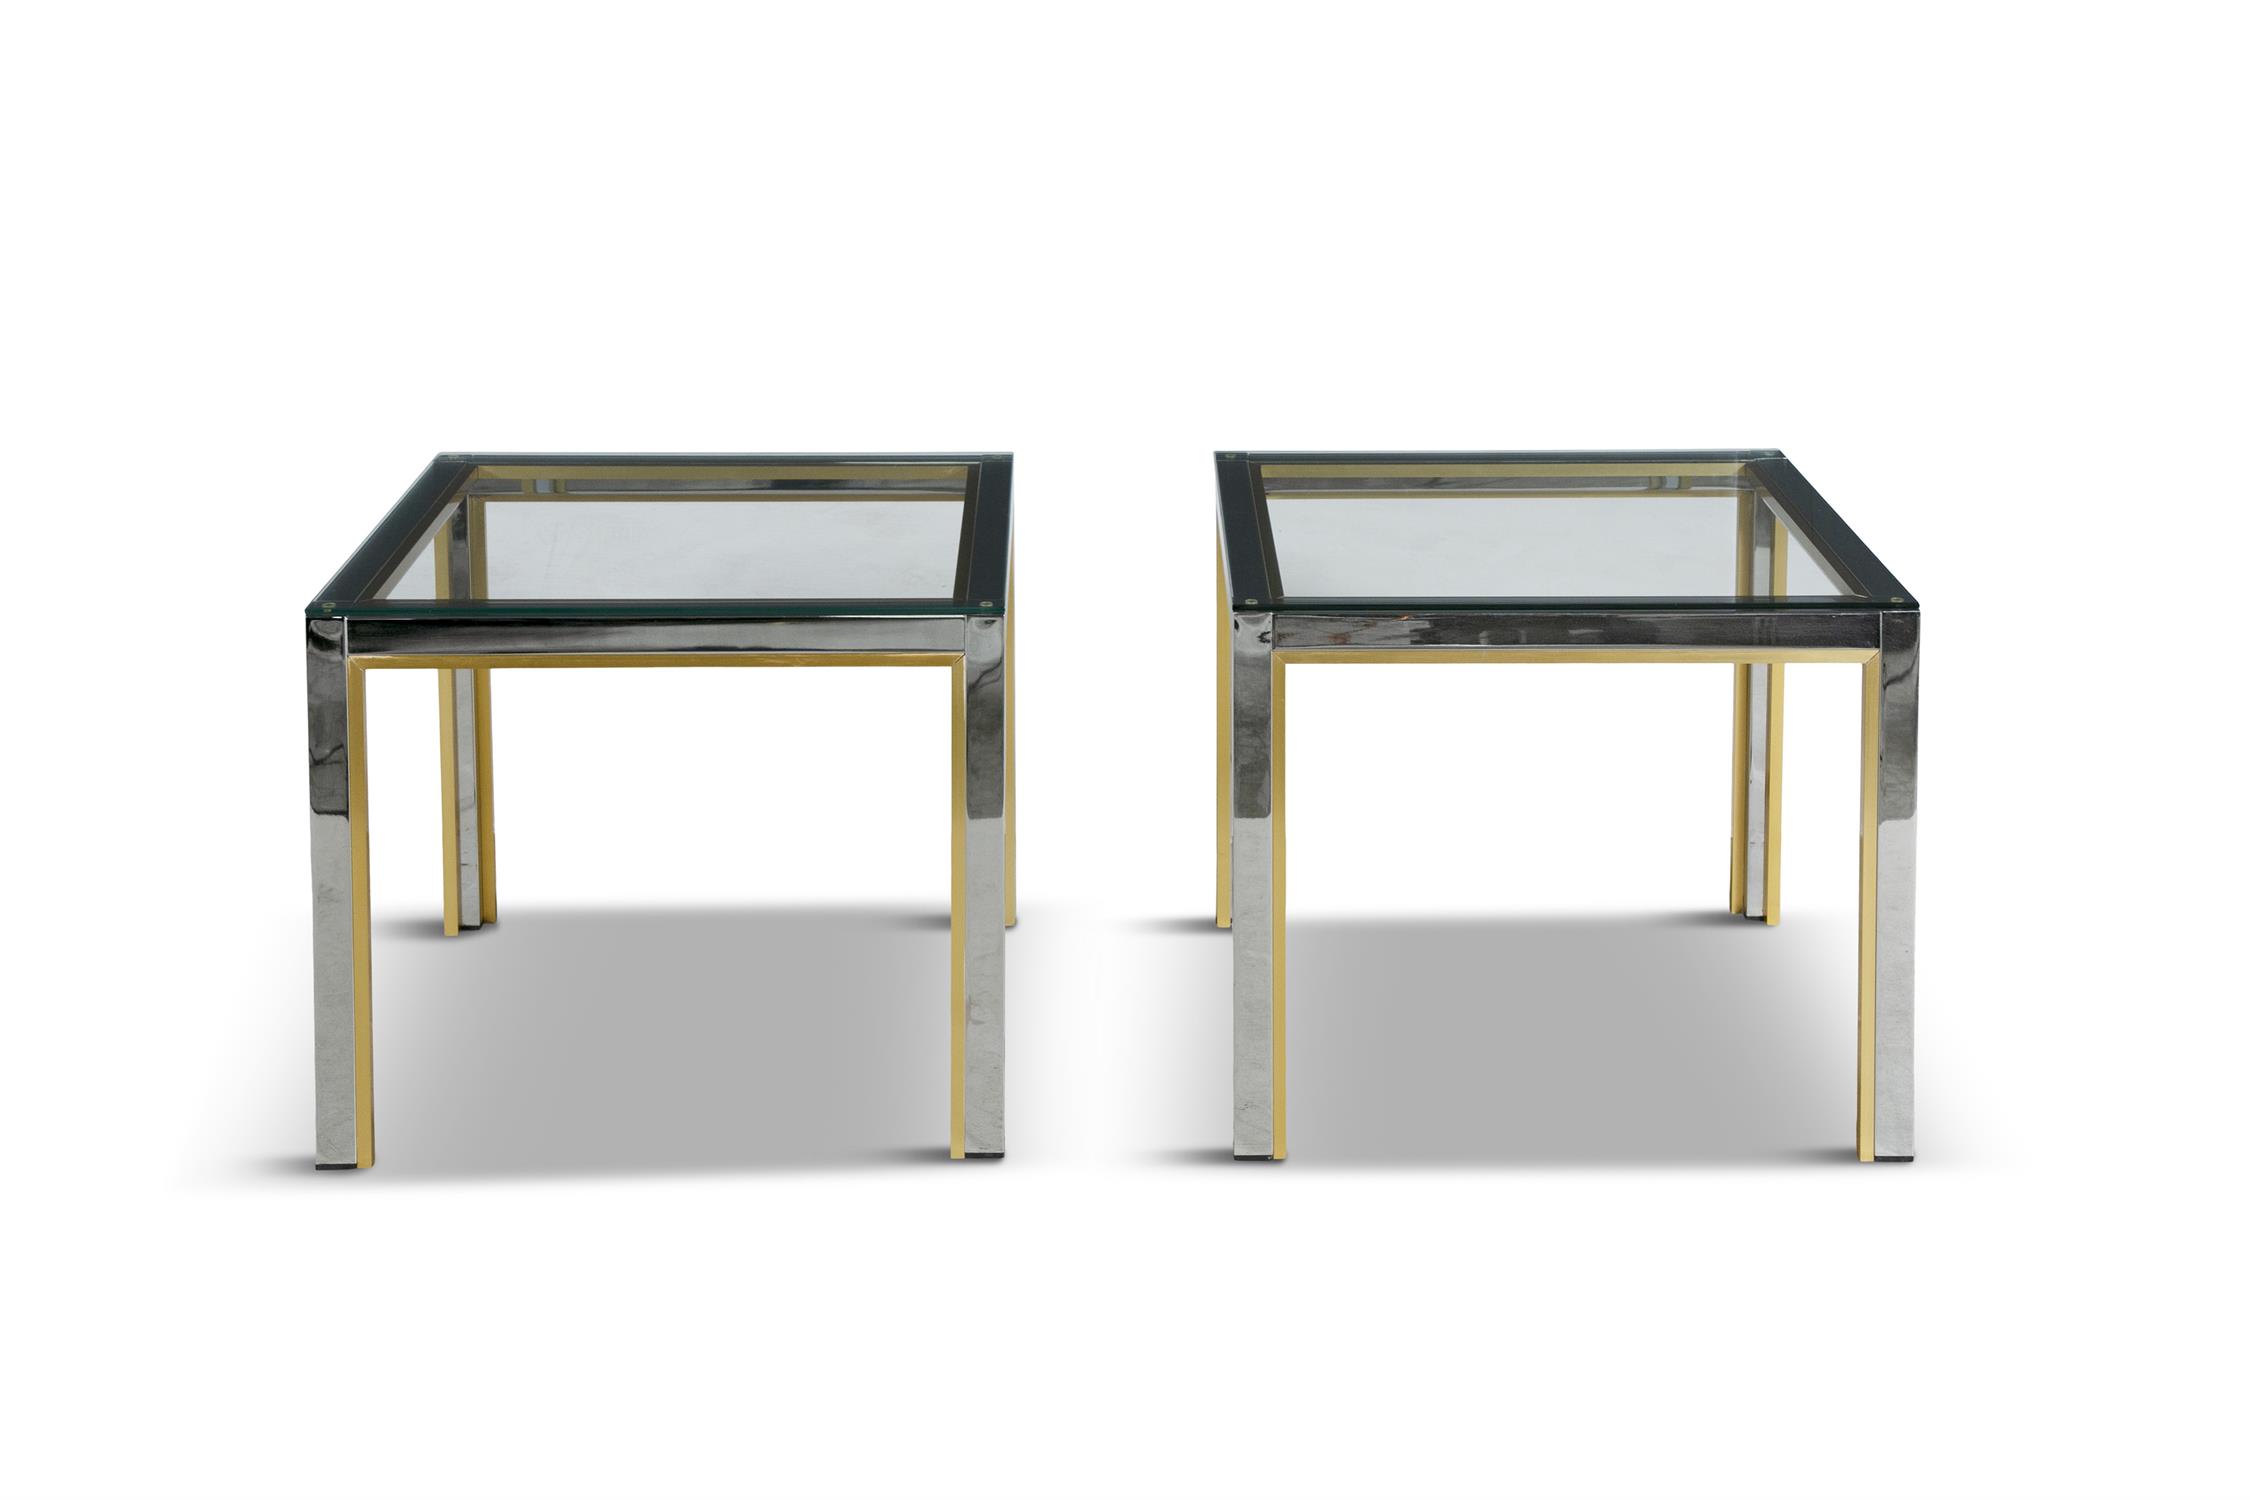 TABLES A pair of chrome and brass tables, attributed to Renato Zevi for Romeo Rega, with glass tops.